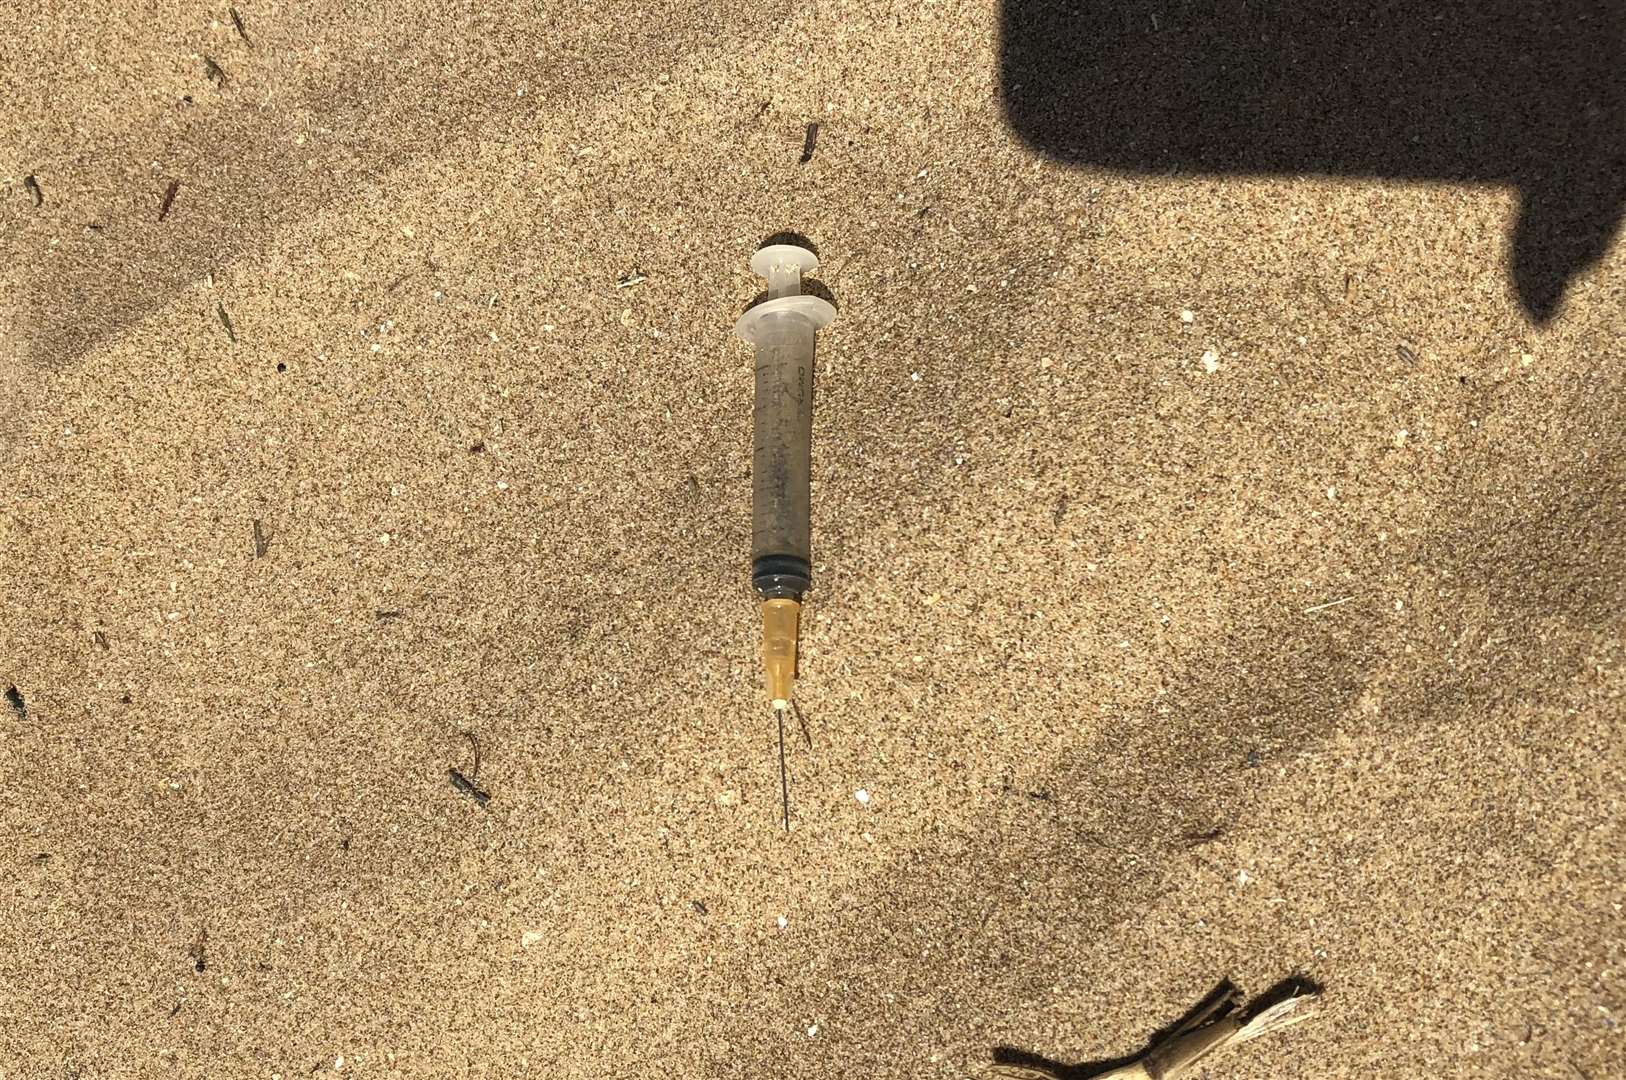 The needle was found at Palm Bay